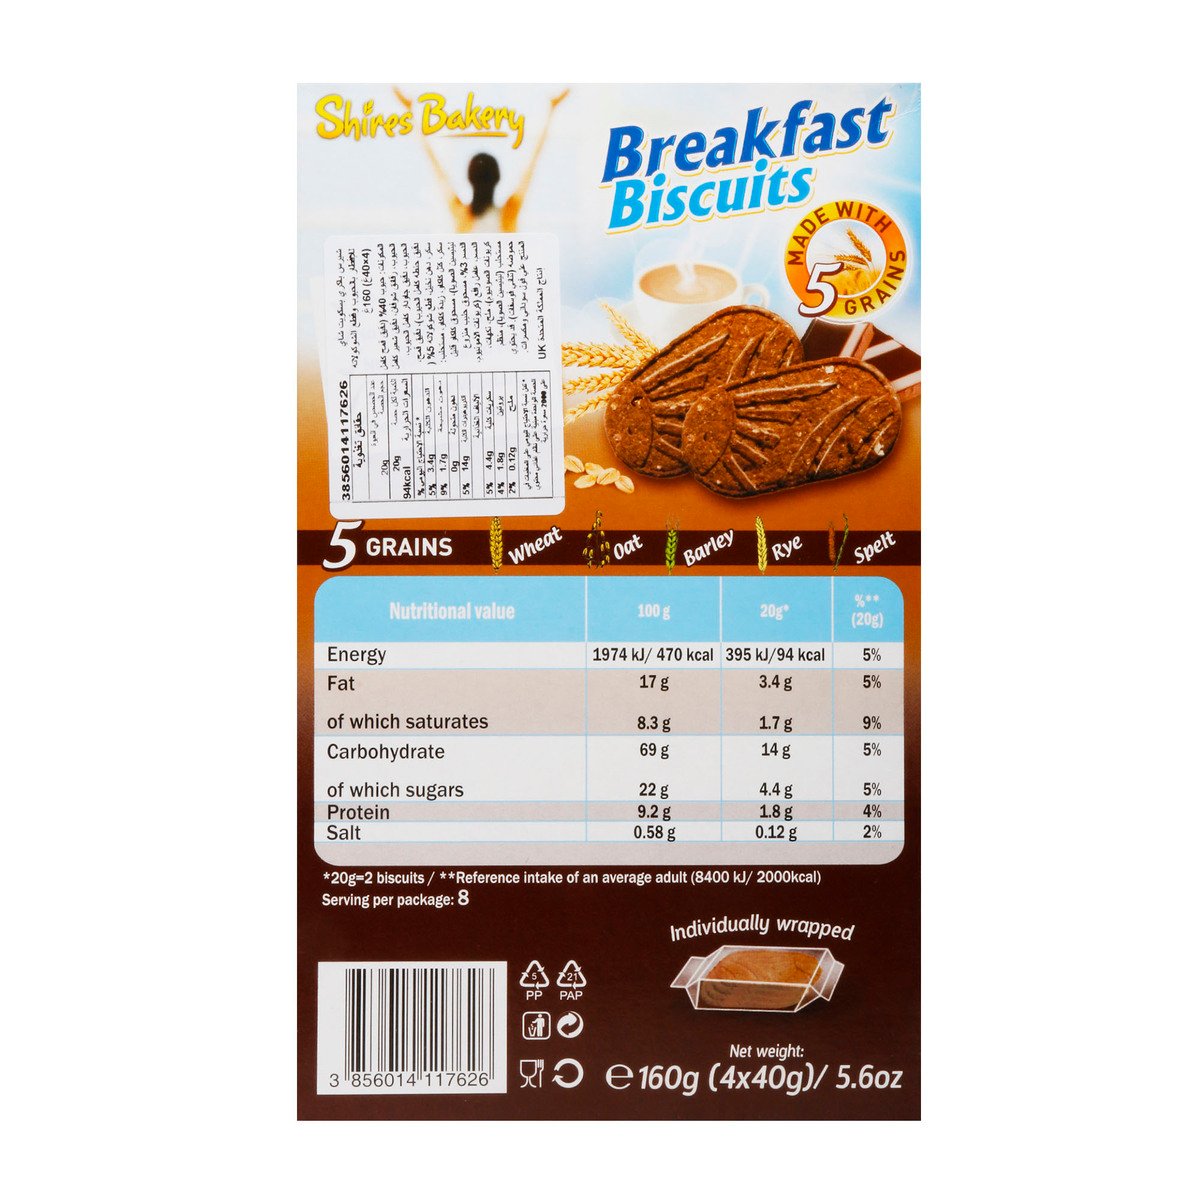 Shires Bakery Breakfast Biscuits Cereals & Choco 160g